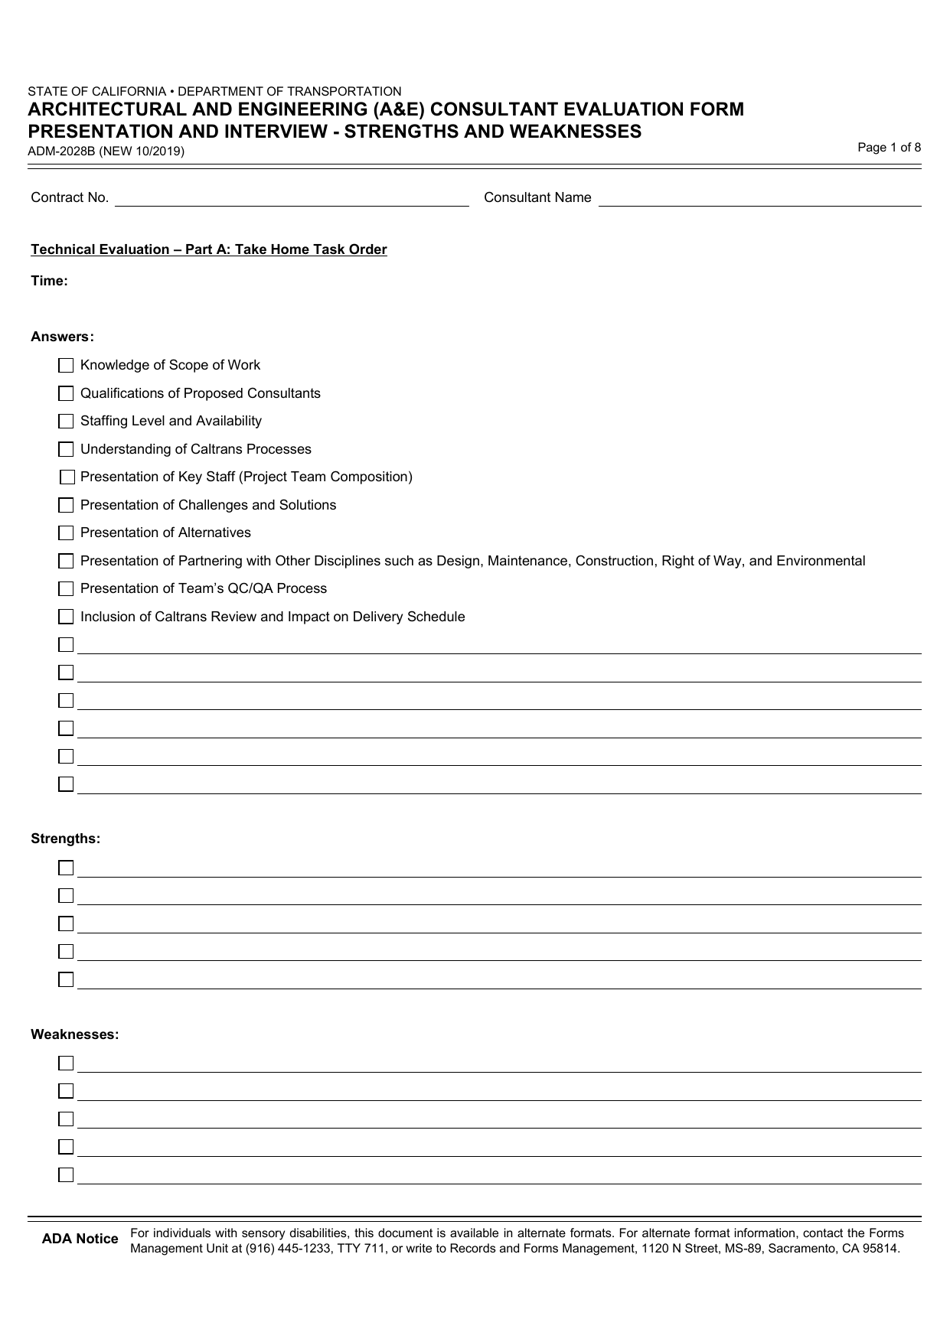 Form ADM-2028B Architectural and Engineering (Ae) Consultant Evaluation Form Presentation and Interview - Strengths and Weaknesses - California, Page 1